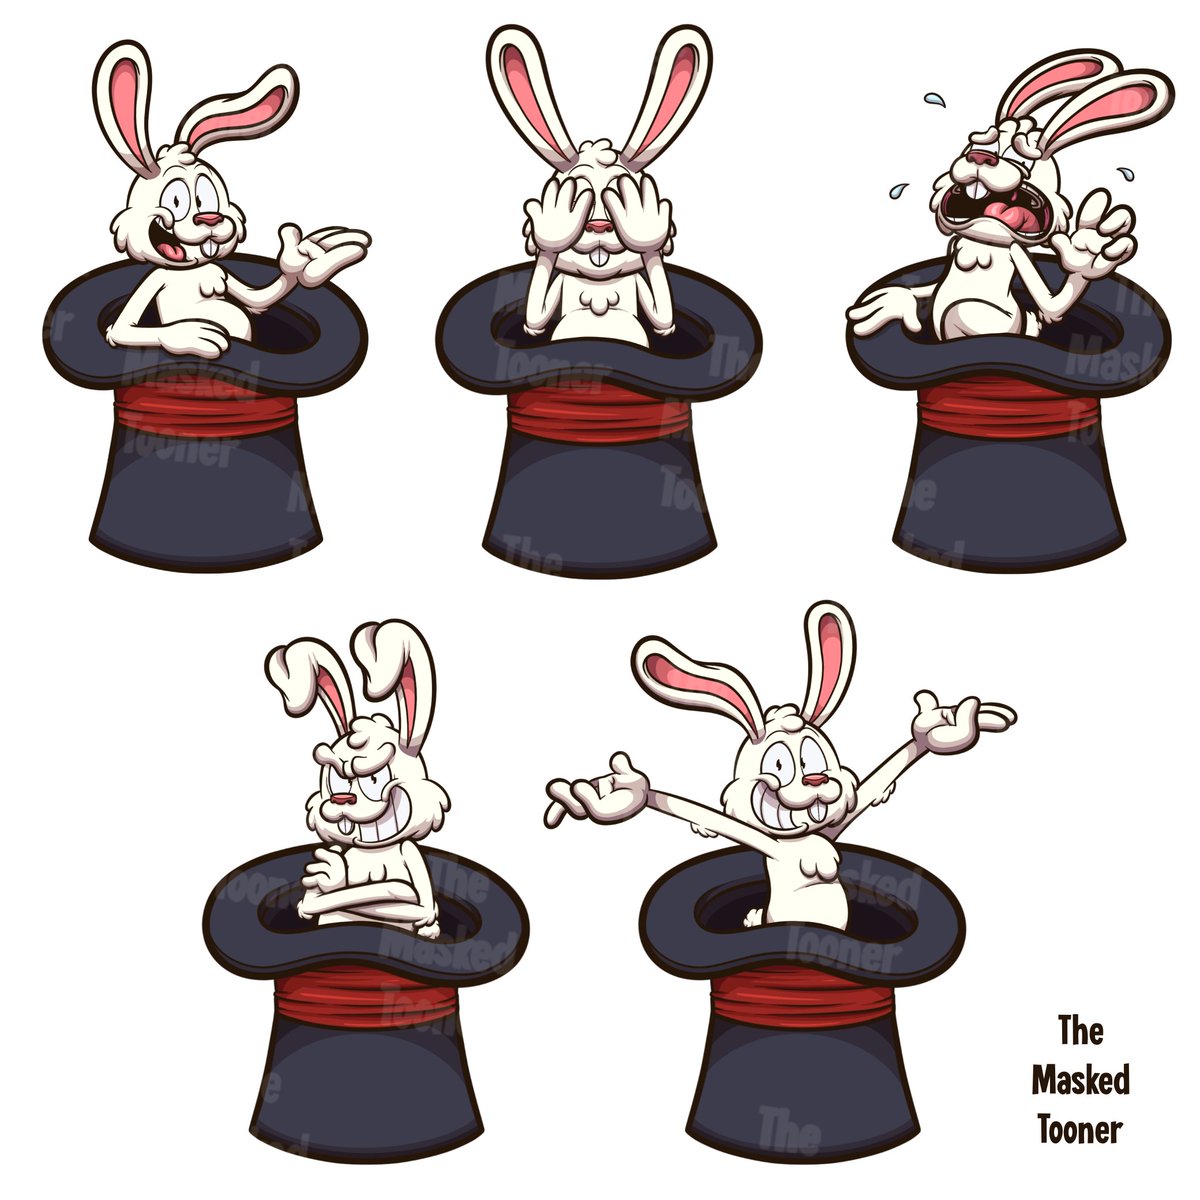 Requested by @arturoclown!🐰✨
-
#magic #magician #illusion #bunny #rabbit #poses #expressions #character #set #characterdesign #charactersheet #cute #adorable #animal #funny #request #artrequest #freelancework #freelanceillustrator #cartoon #themaskedtooner #vector #vectorart